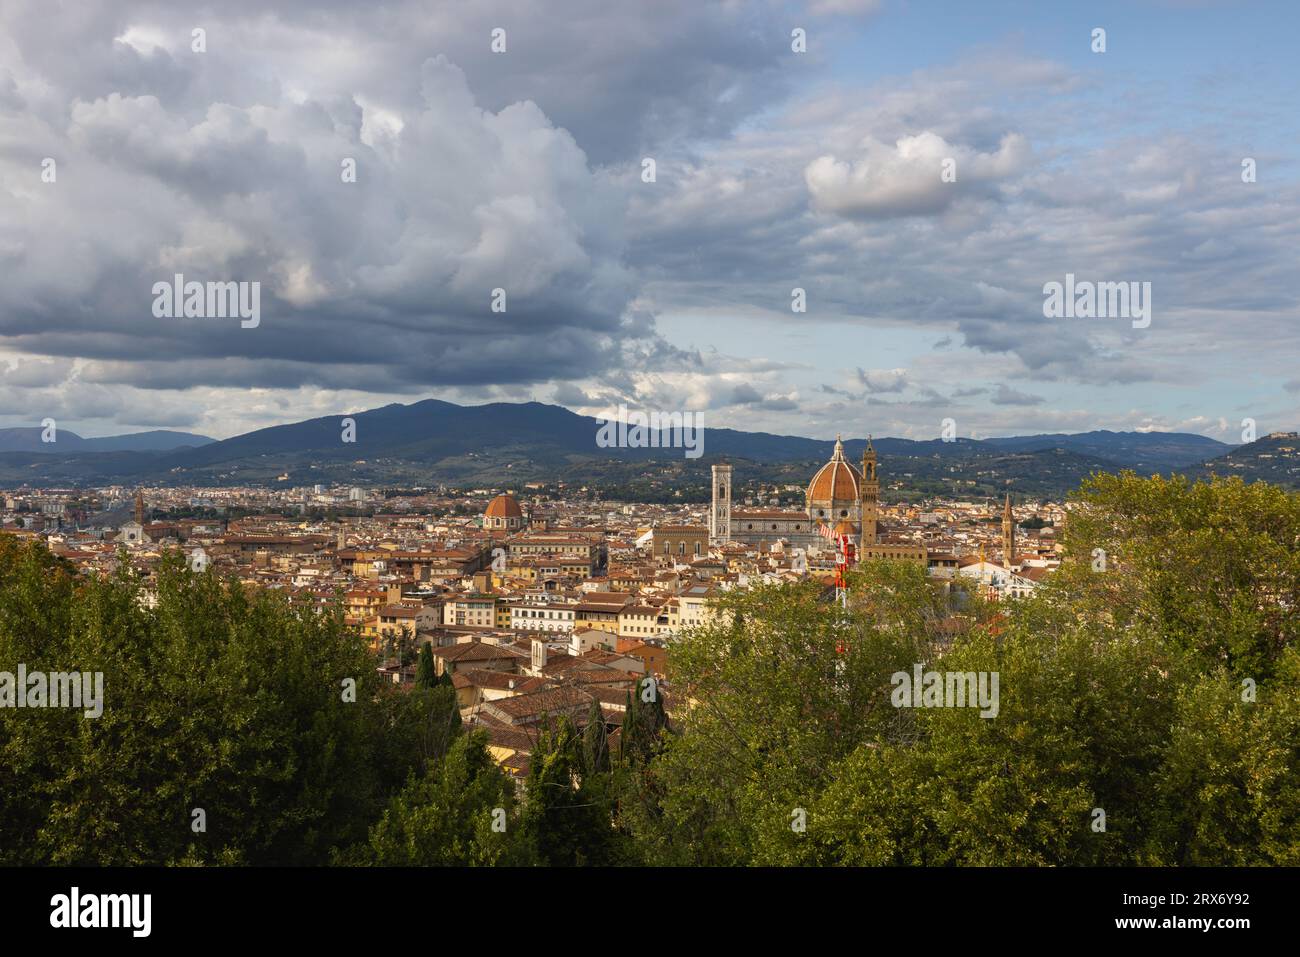 View of the city of Florence from the Forte di Belvedere, Italy Stock Photo